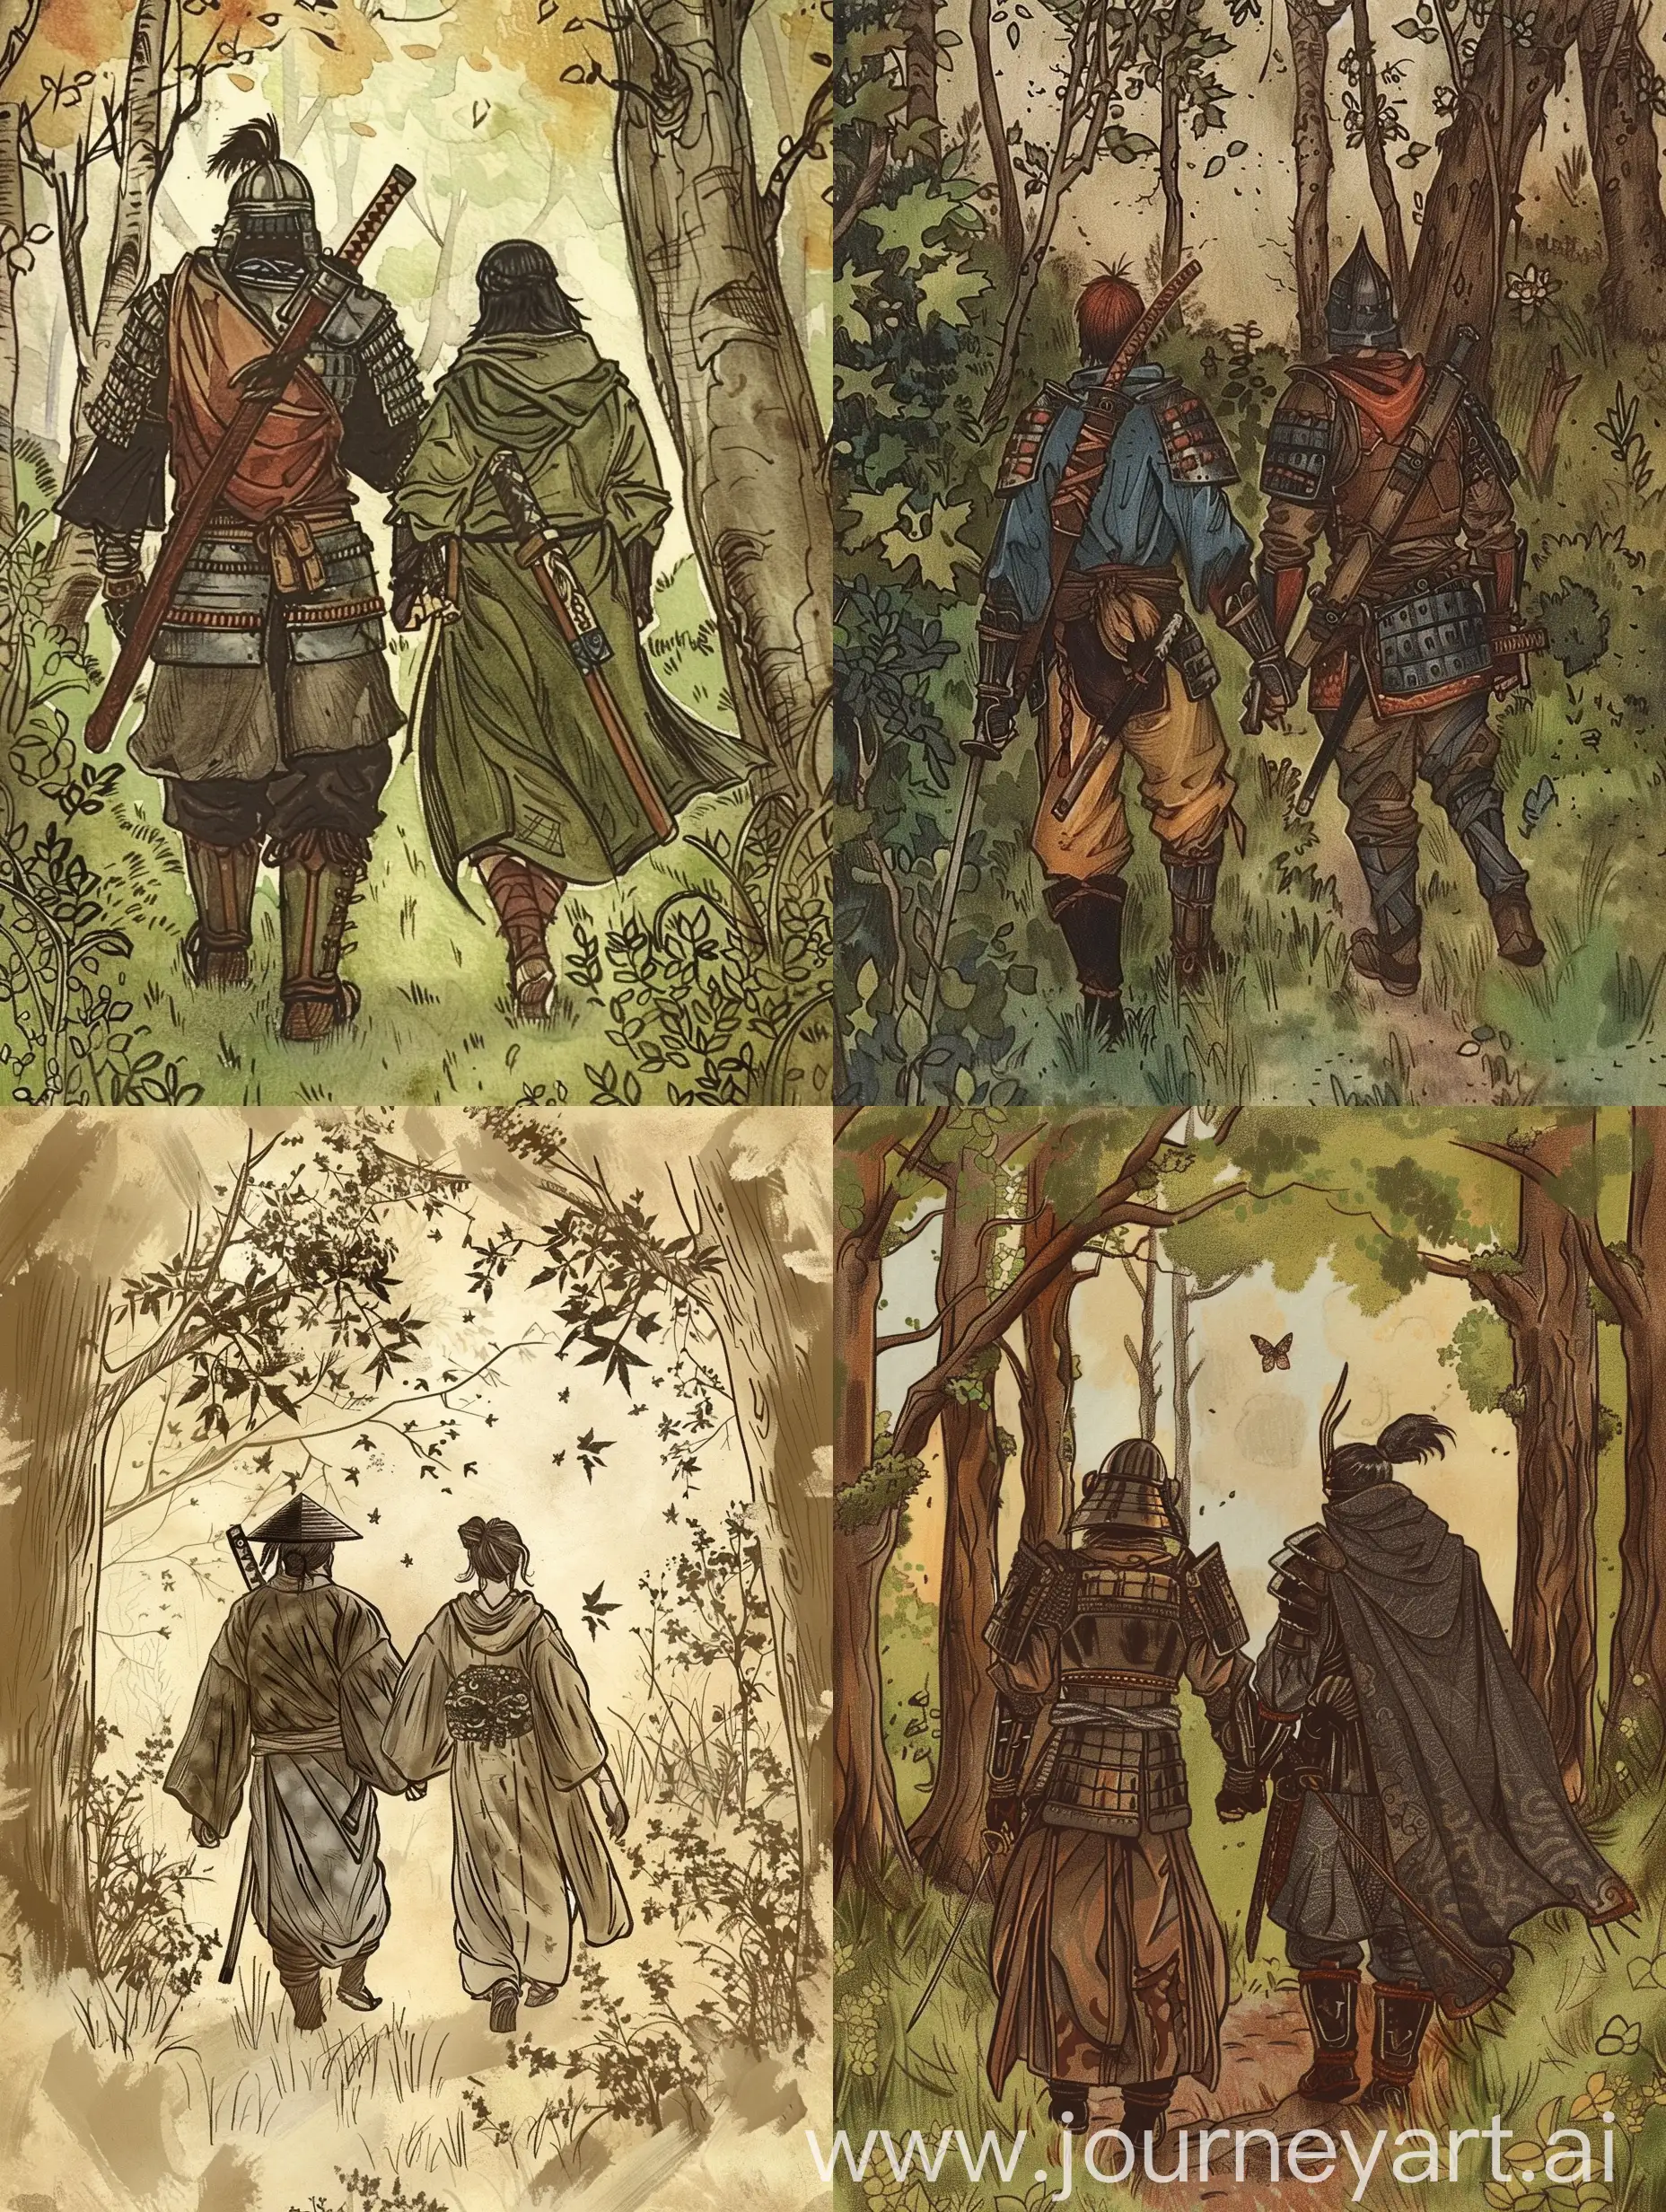 Medieval-Samurai-and-Bard-Strolling-Through-Forest